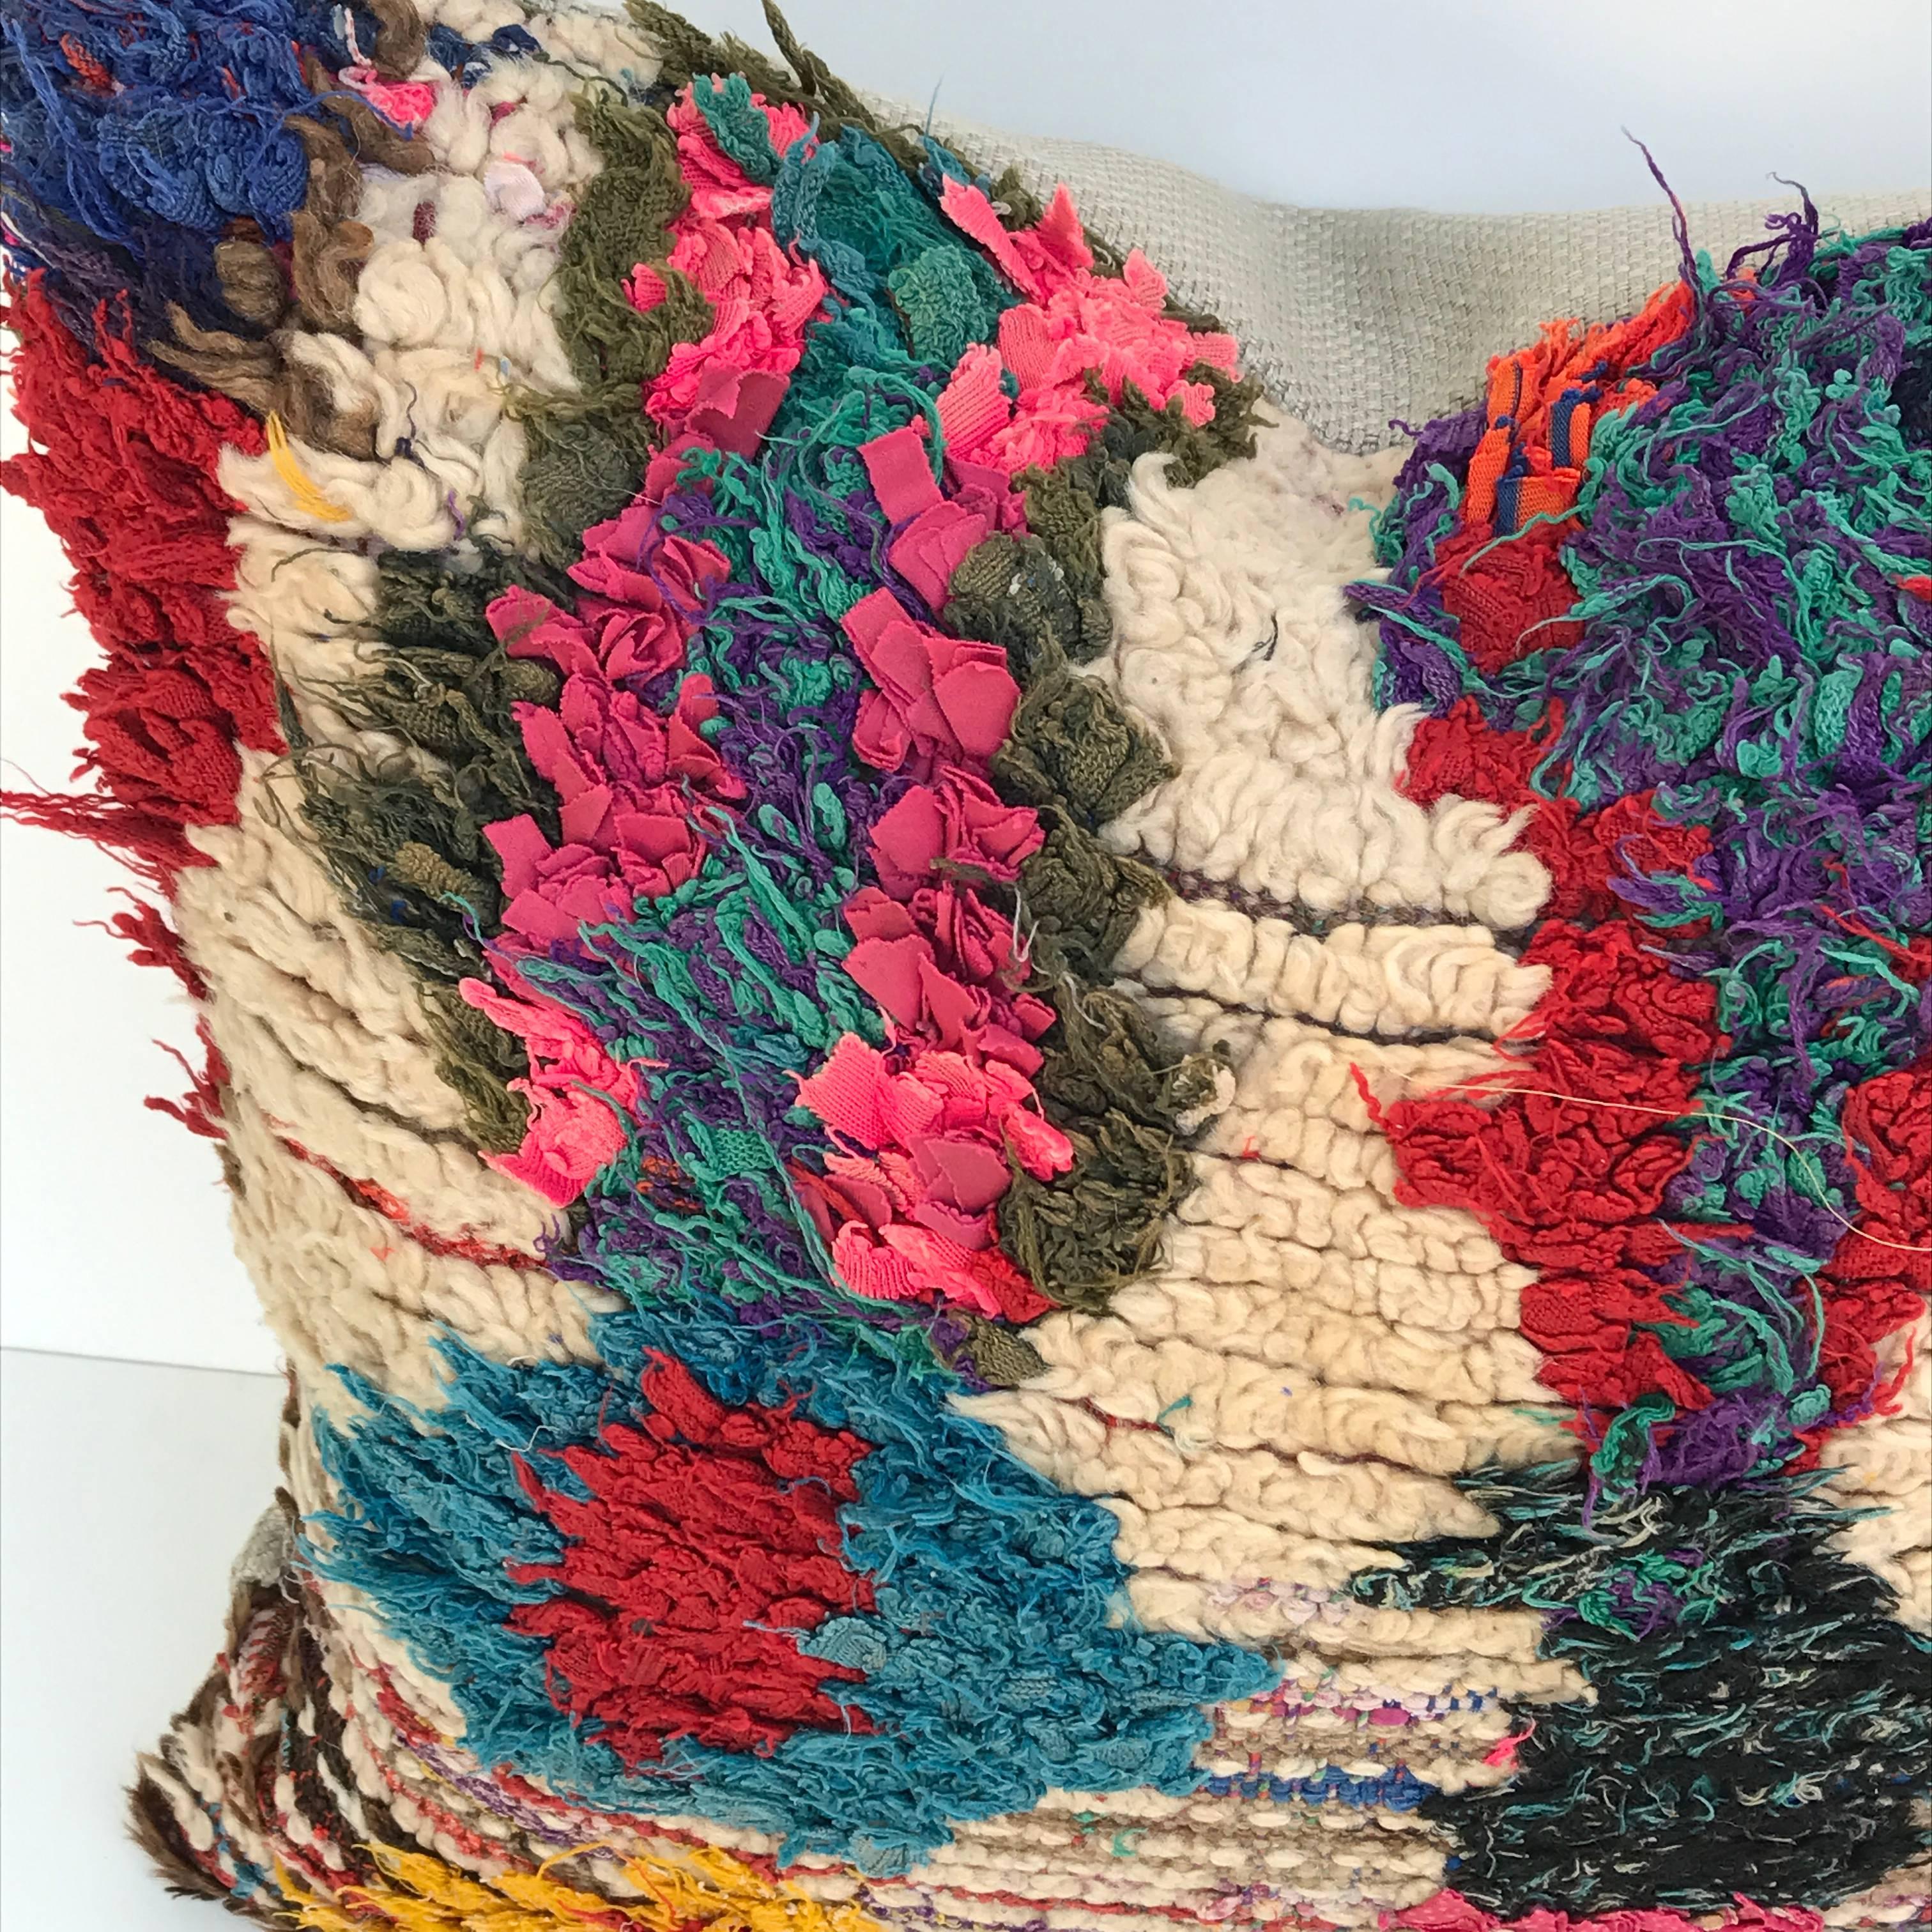 Custom pillow cut from a vintage hand-loomed Moroccan Berber rug from the Atlas Mountains. Wool is soft and lustrous with brightly colored tufting. Pillow is backed in a putty colored linen, filled with an insert of 50/50 down and feathers and